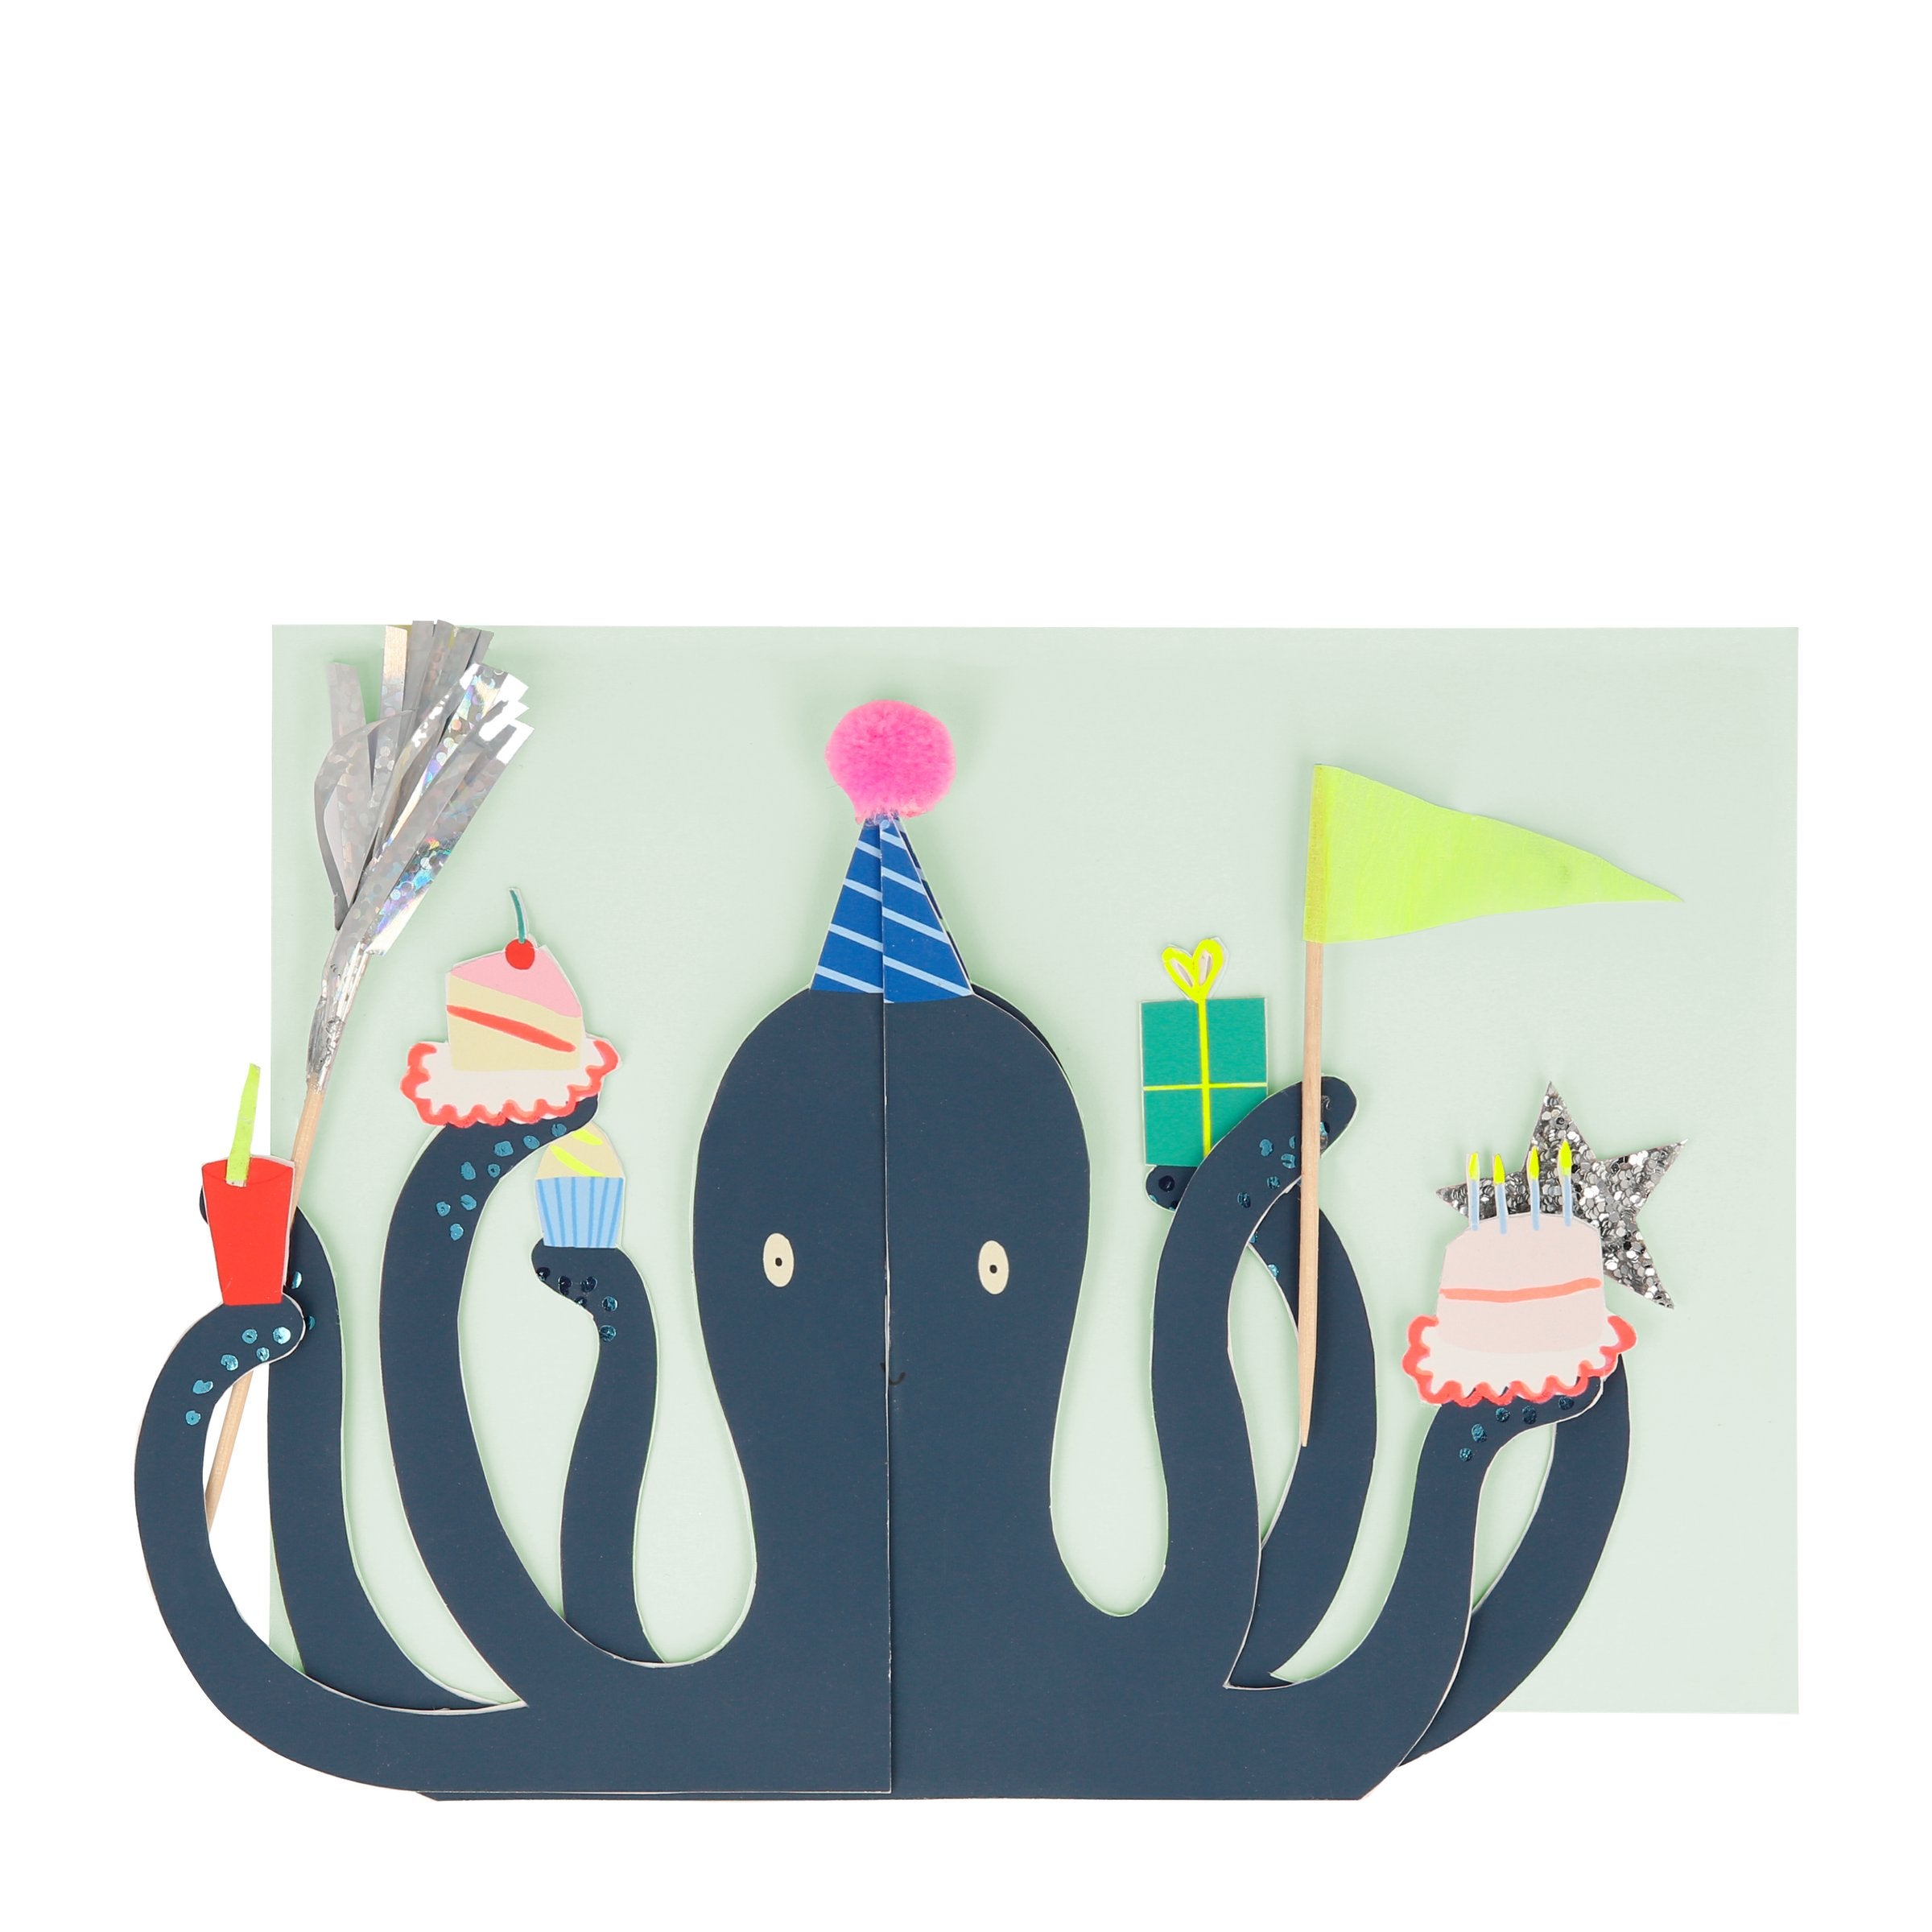 Our octopus card is the perfect 3D birthday card for kids or for an under-the-sea birthday party.